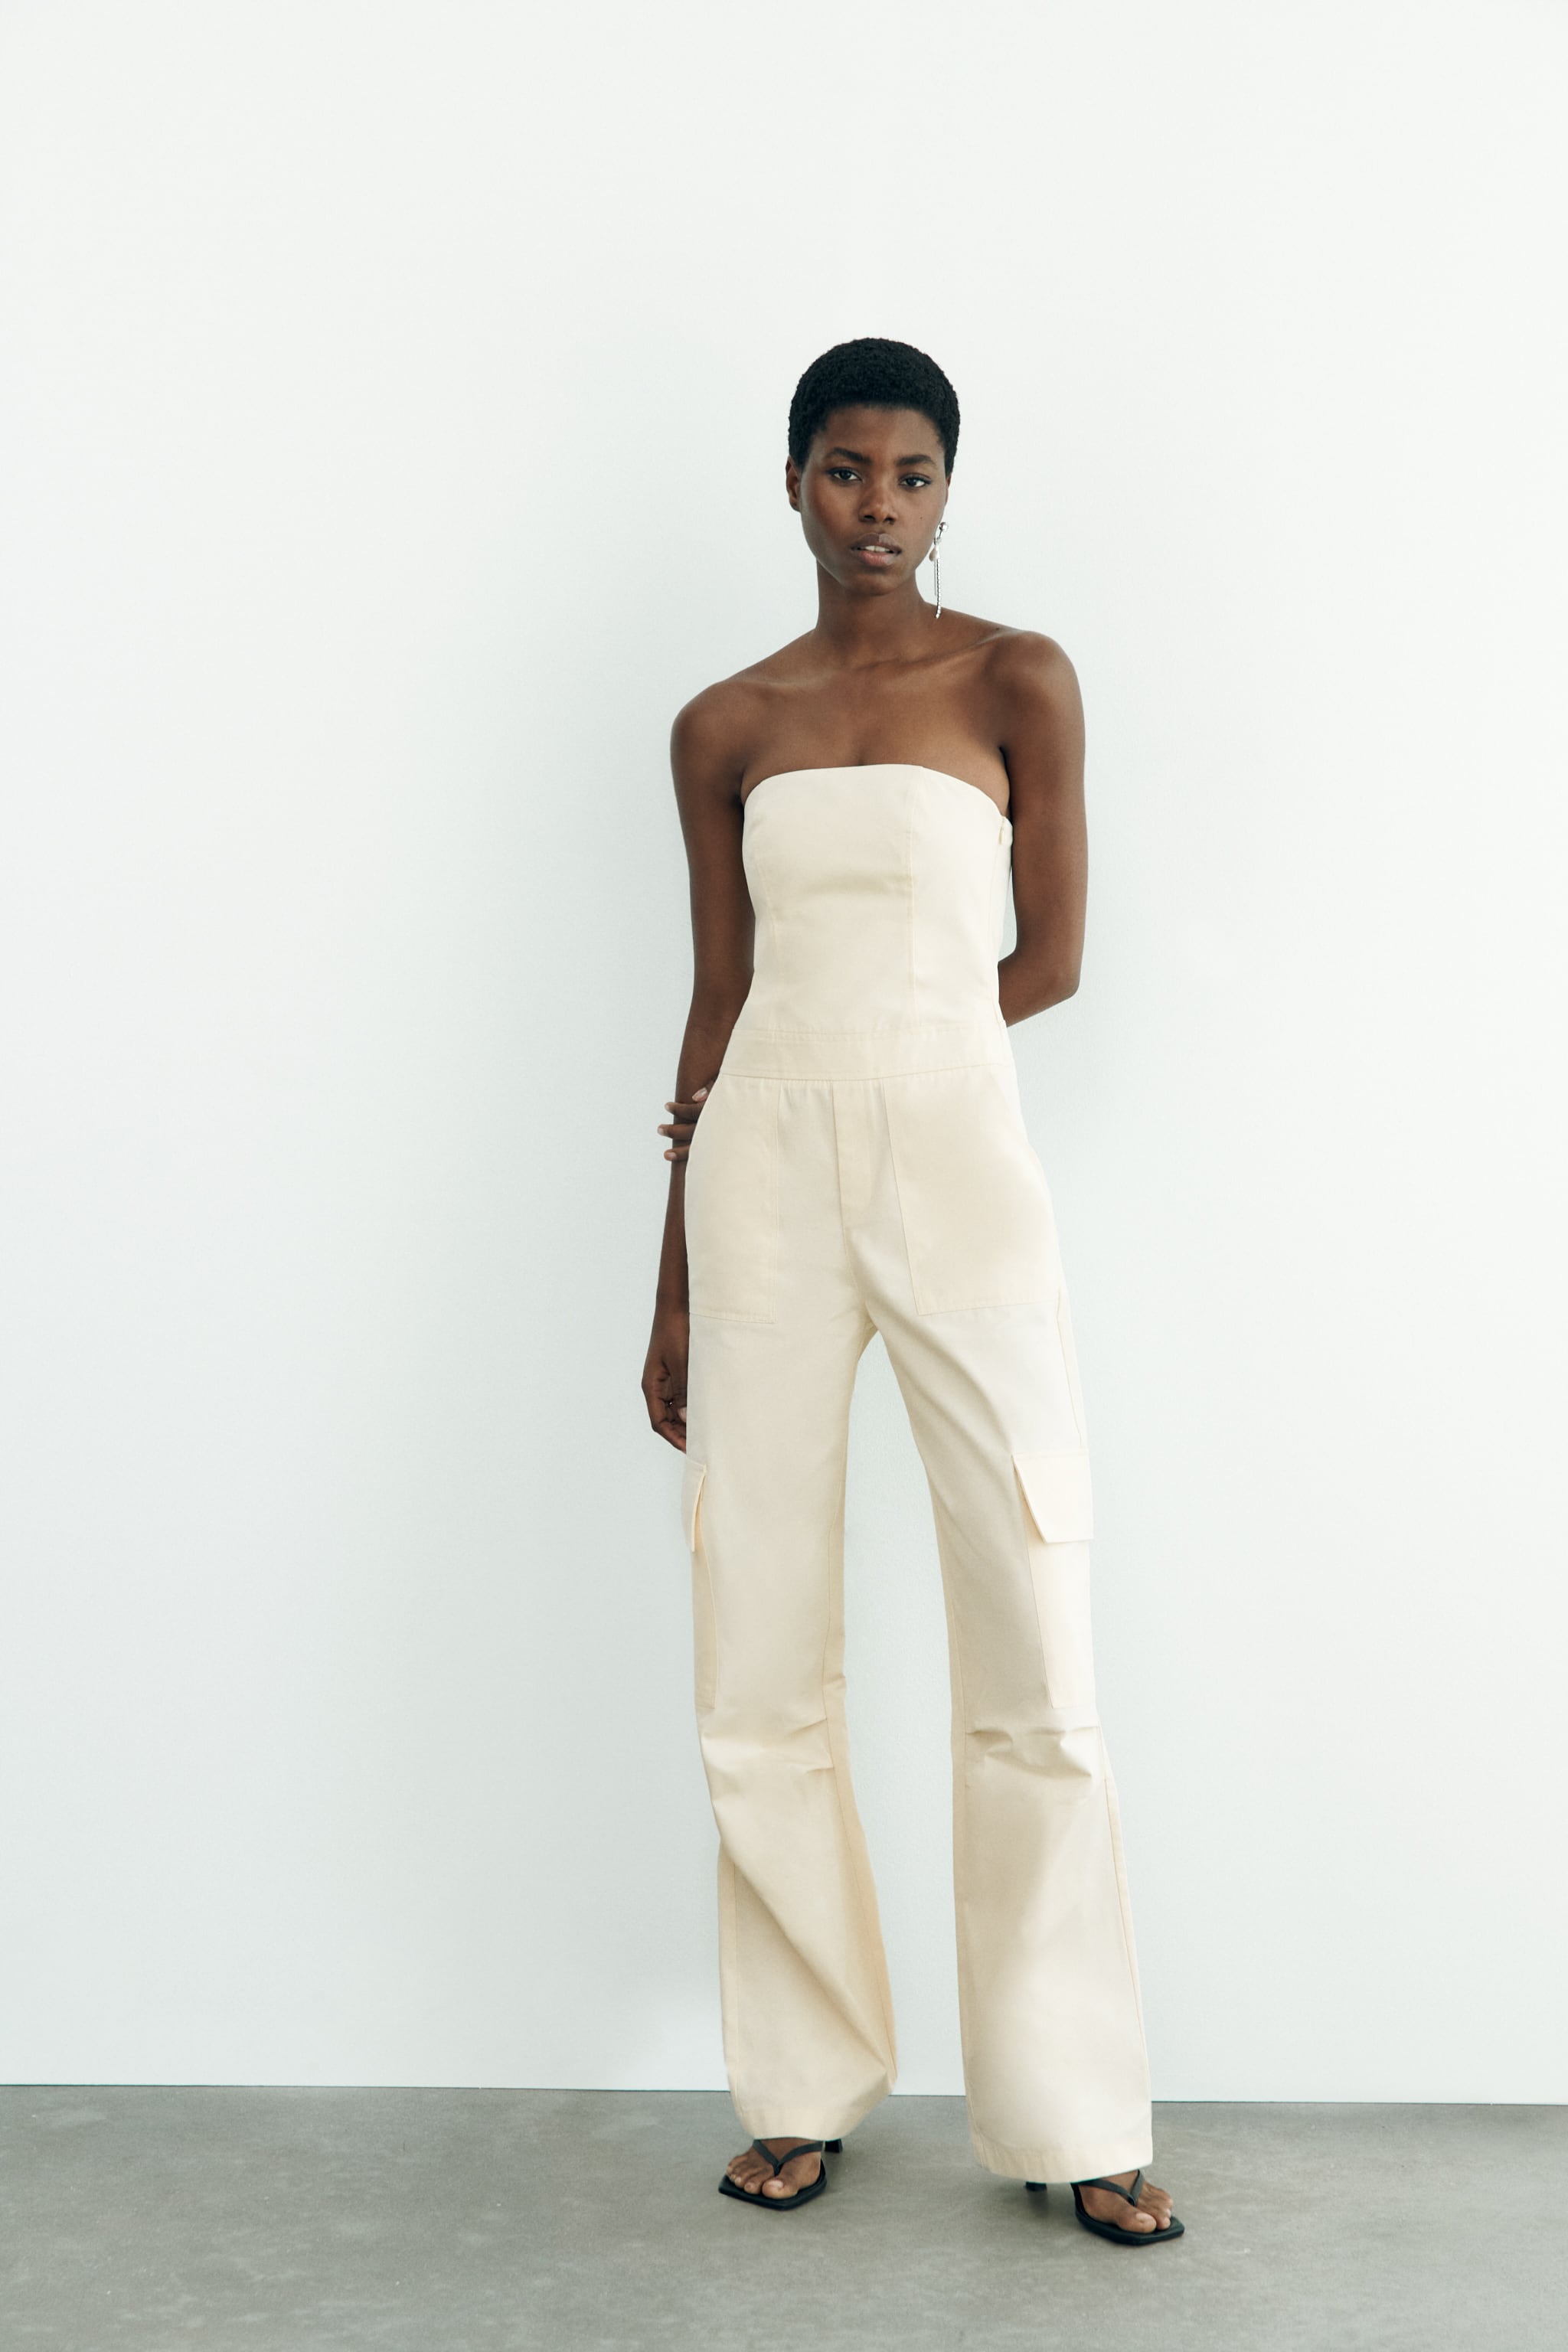 Zara Best Sellers: The 8 Pieces Everyone Wants Right Now | Who What Wear UK